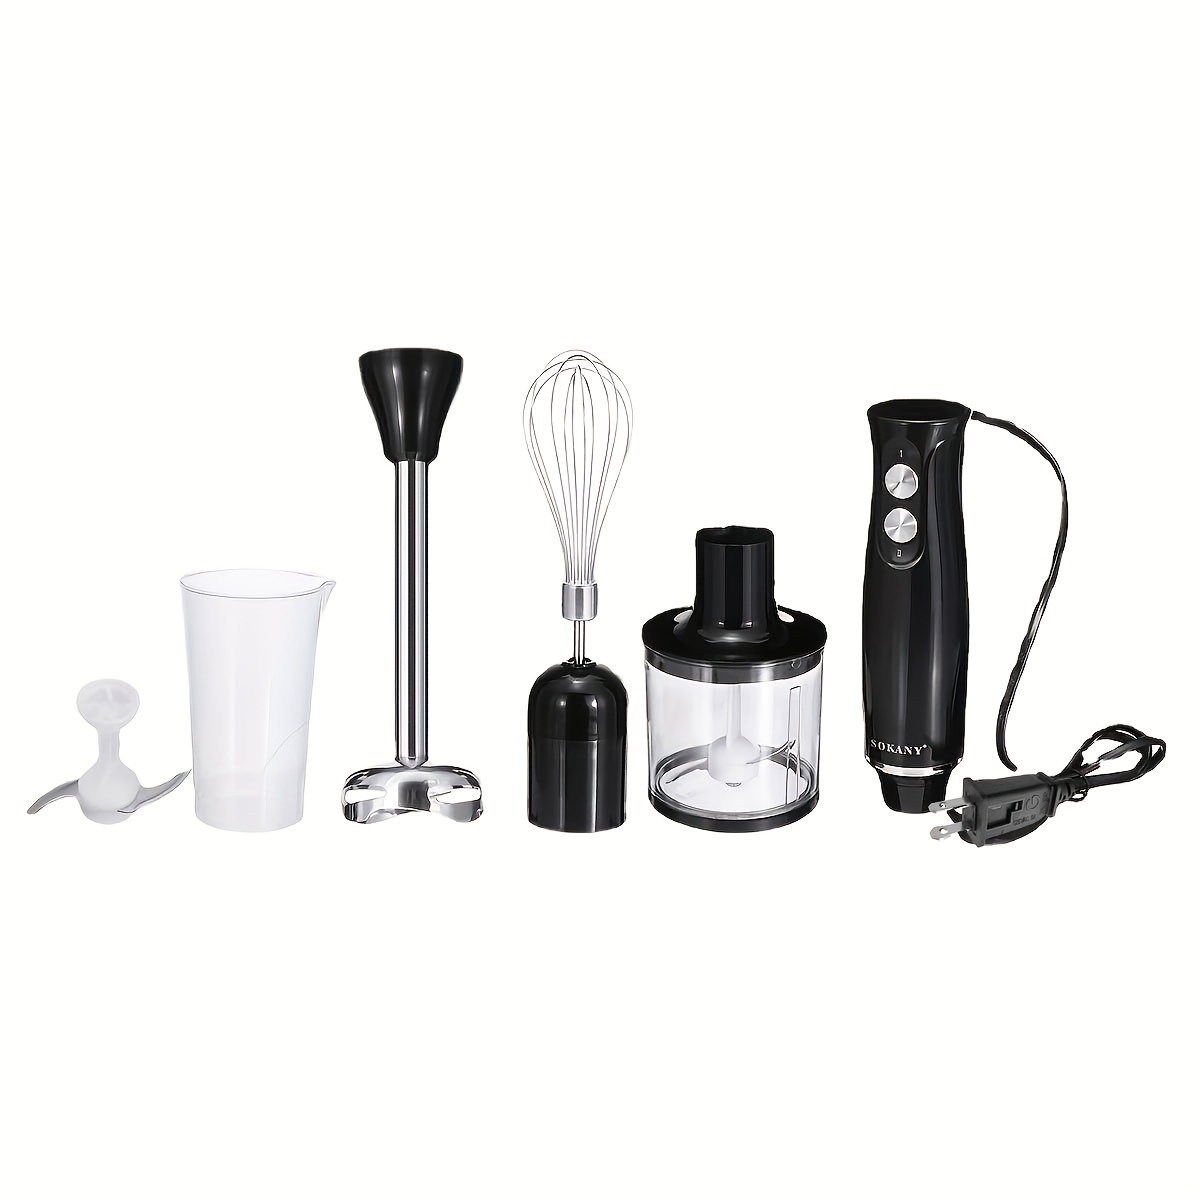 KOIOS 1000W 12-Speed 5 in 1 Hand Mixer Stick Blender with 304 Stainless  Steel Blade, Food Processor, Beaker, Egg Whisk and Milk Frother, BPA-Free,  for